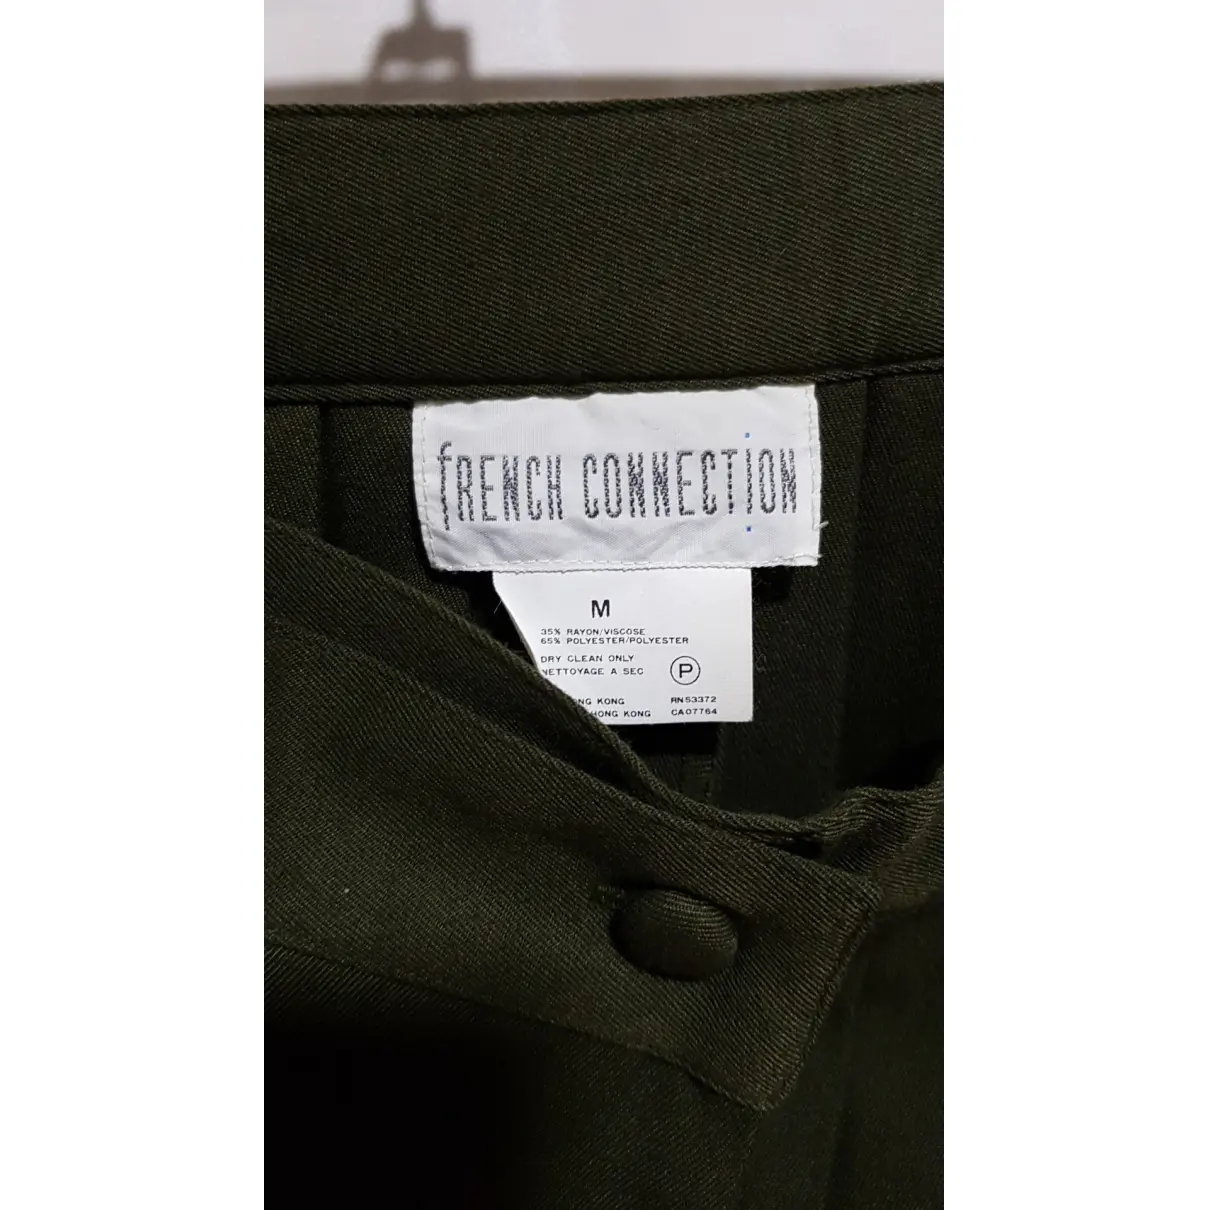 Luxury French Connection Skirts Women